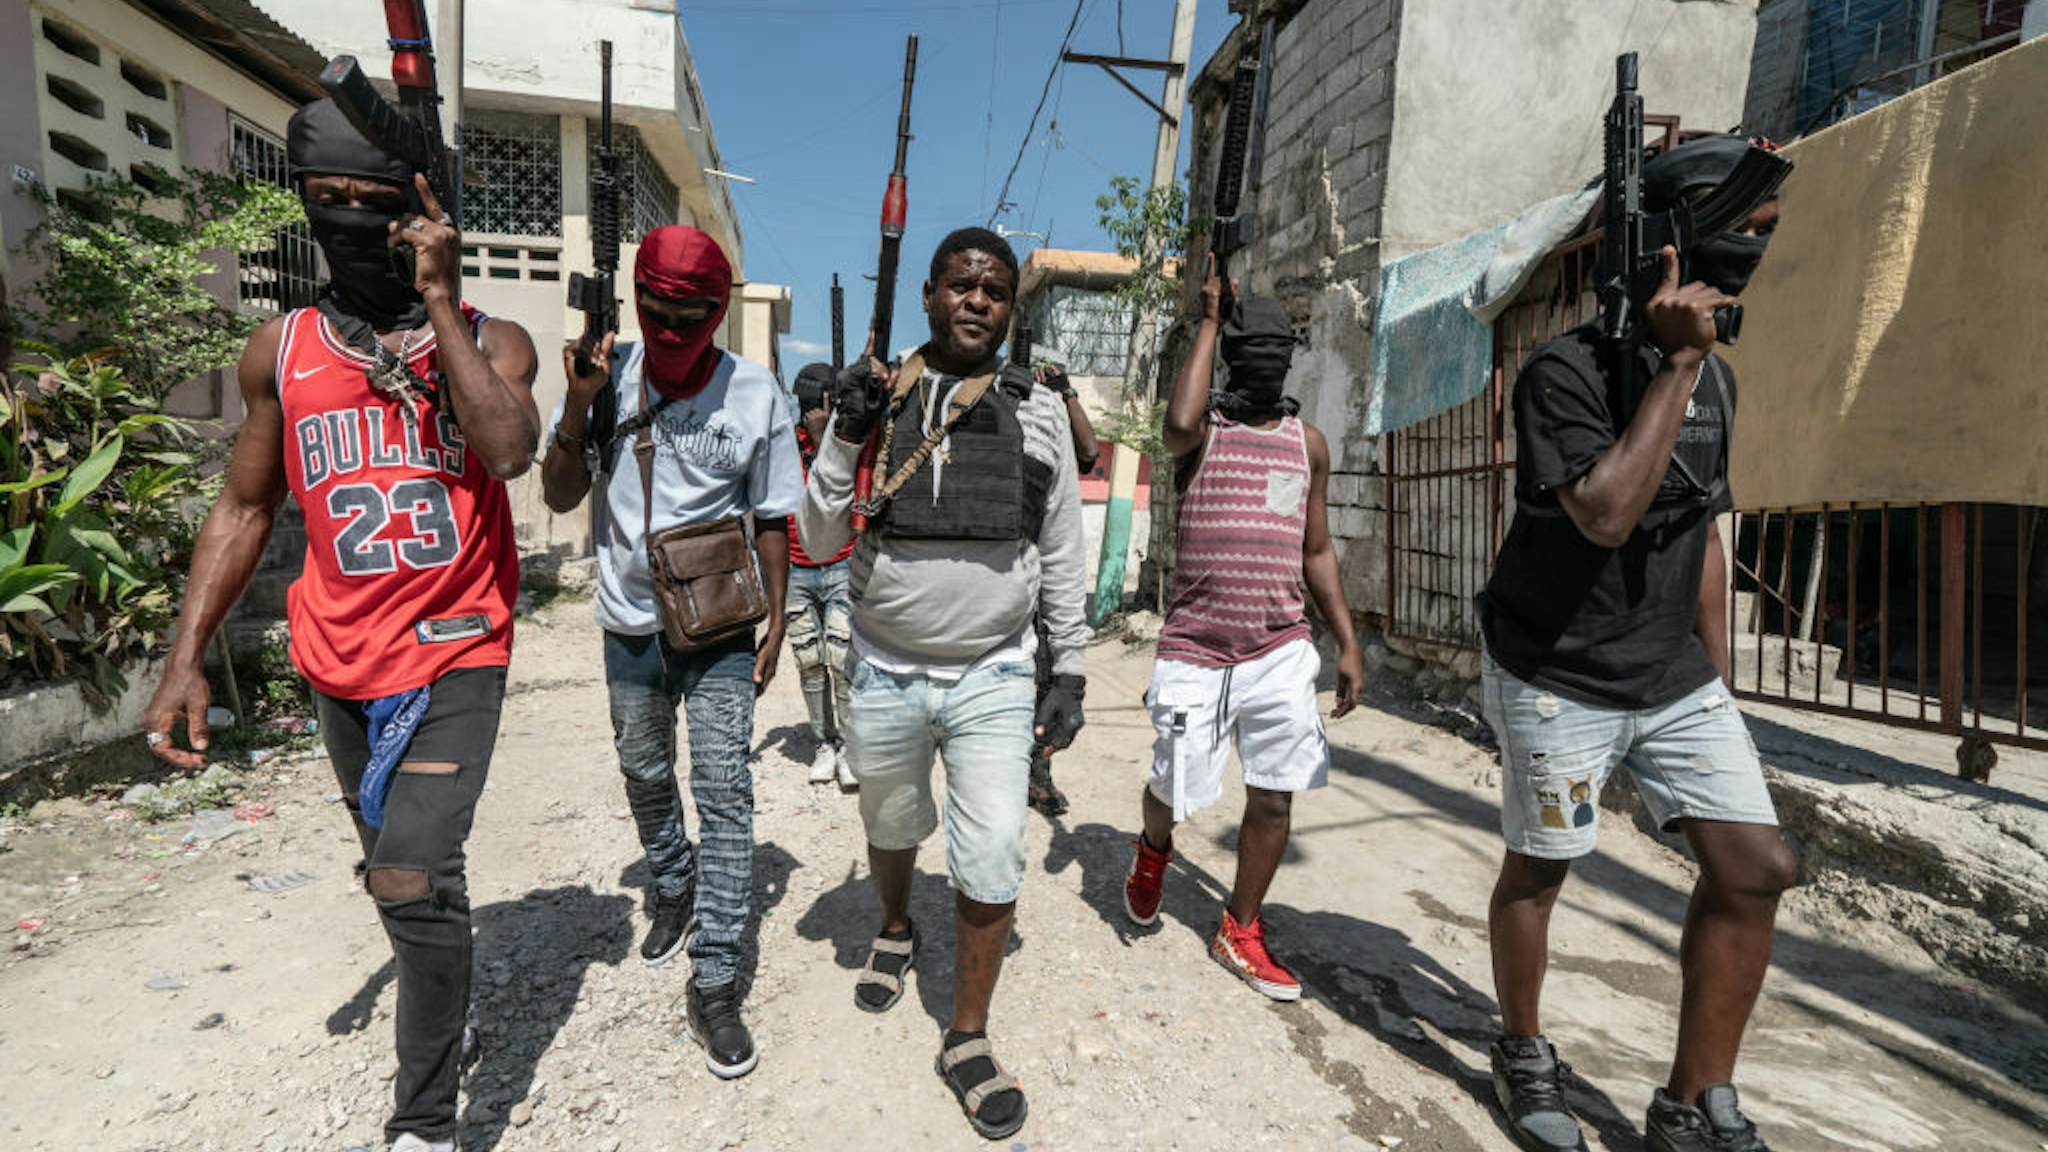 PORT-AU-PRINCE, HAITI - FEBRUARY 22: Gang Leader Jimmy 'Barbecue' Cherizier patrolling the streets with G-9 federation gang members in the Delmas 3 area on February 22, 2024, in Port-au-Prince, Haiti. There has a been fresh wave of violence in Port-au-Prince where, according to UN estimates, gangs control 80% of the city. (Photo by Giles Clarke/Getty Images)